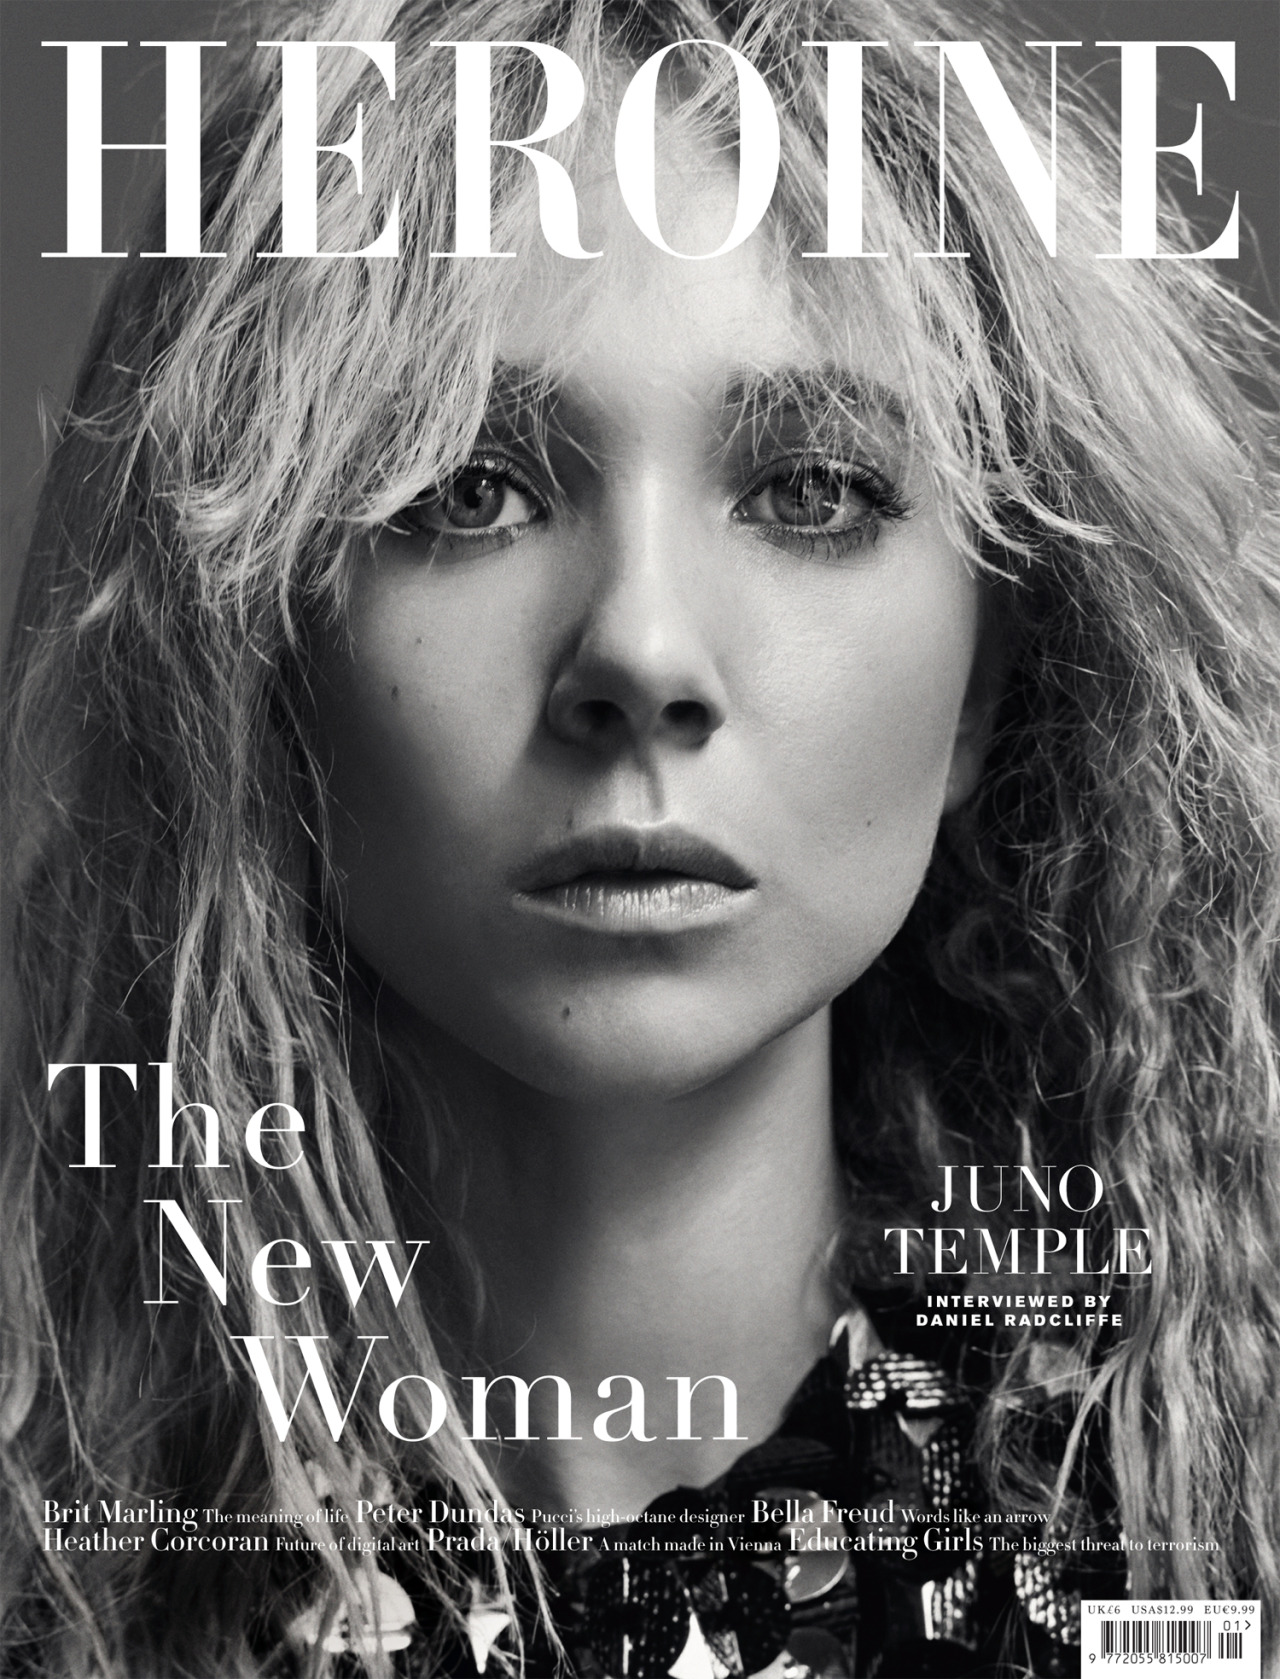 Juno Temple, photographed by Sebastian Kim for Heroine magazine, issue 1, F/W 2014.
I SEE BRIT’S MARLING’S NAME ON THE COVER!!!
(click the image for extremely high-res photo.)